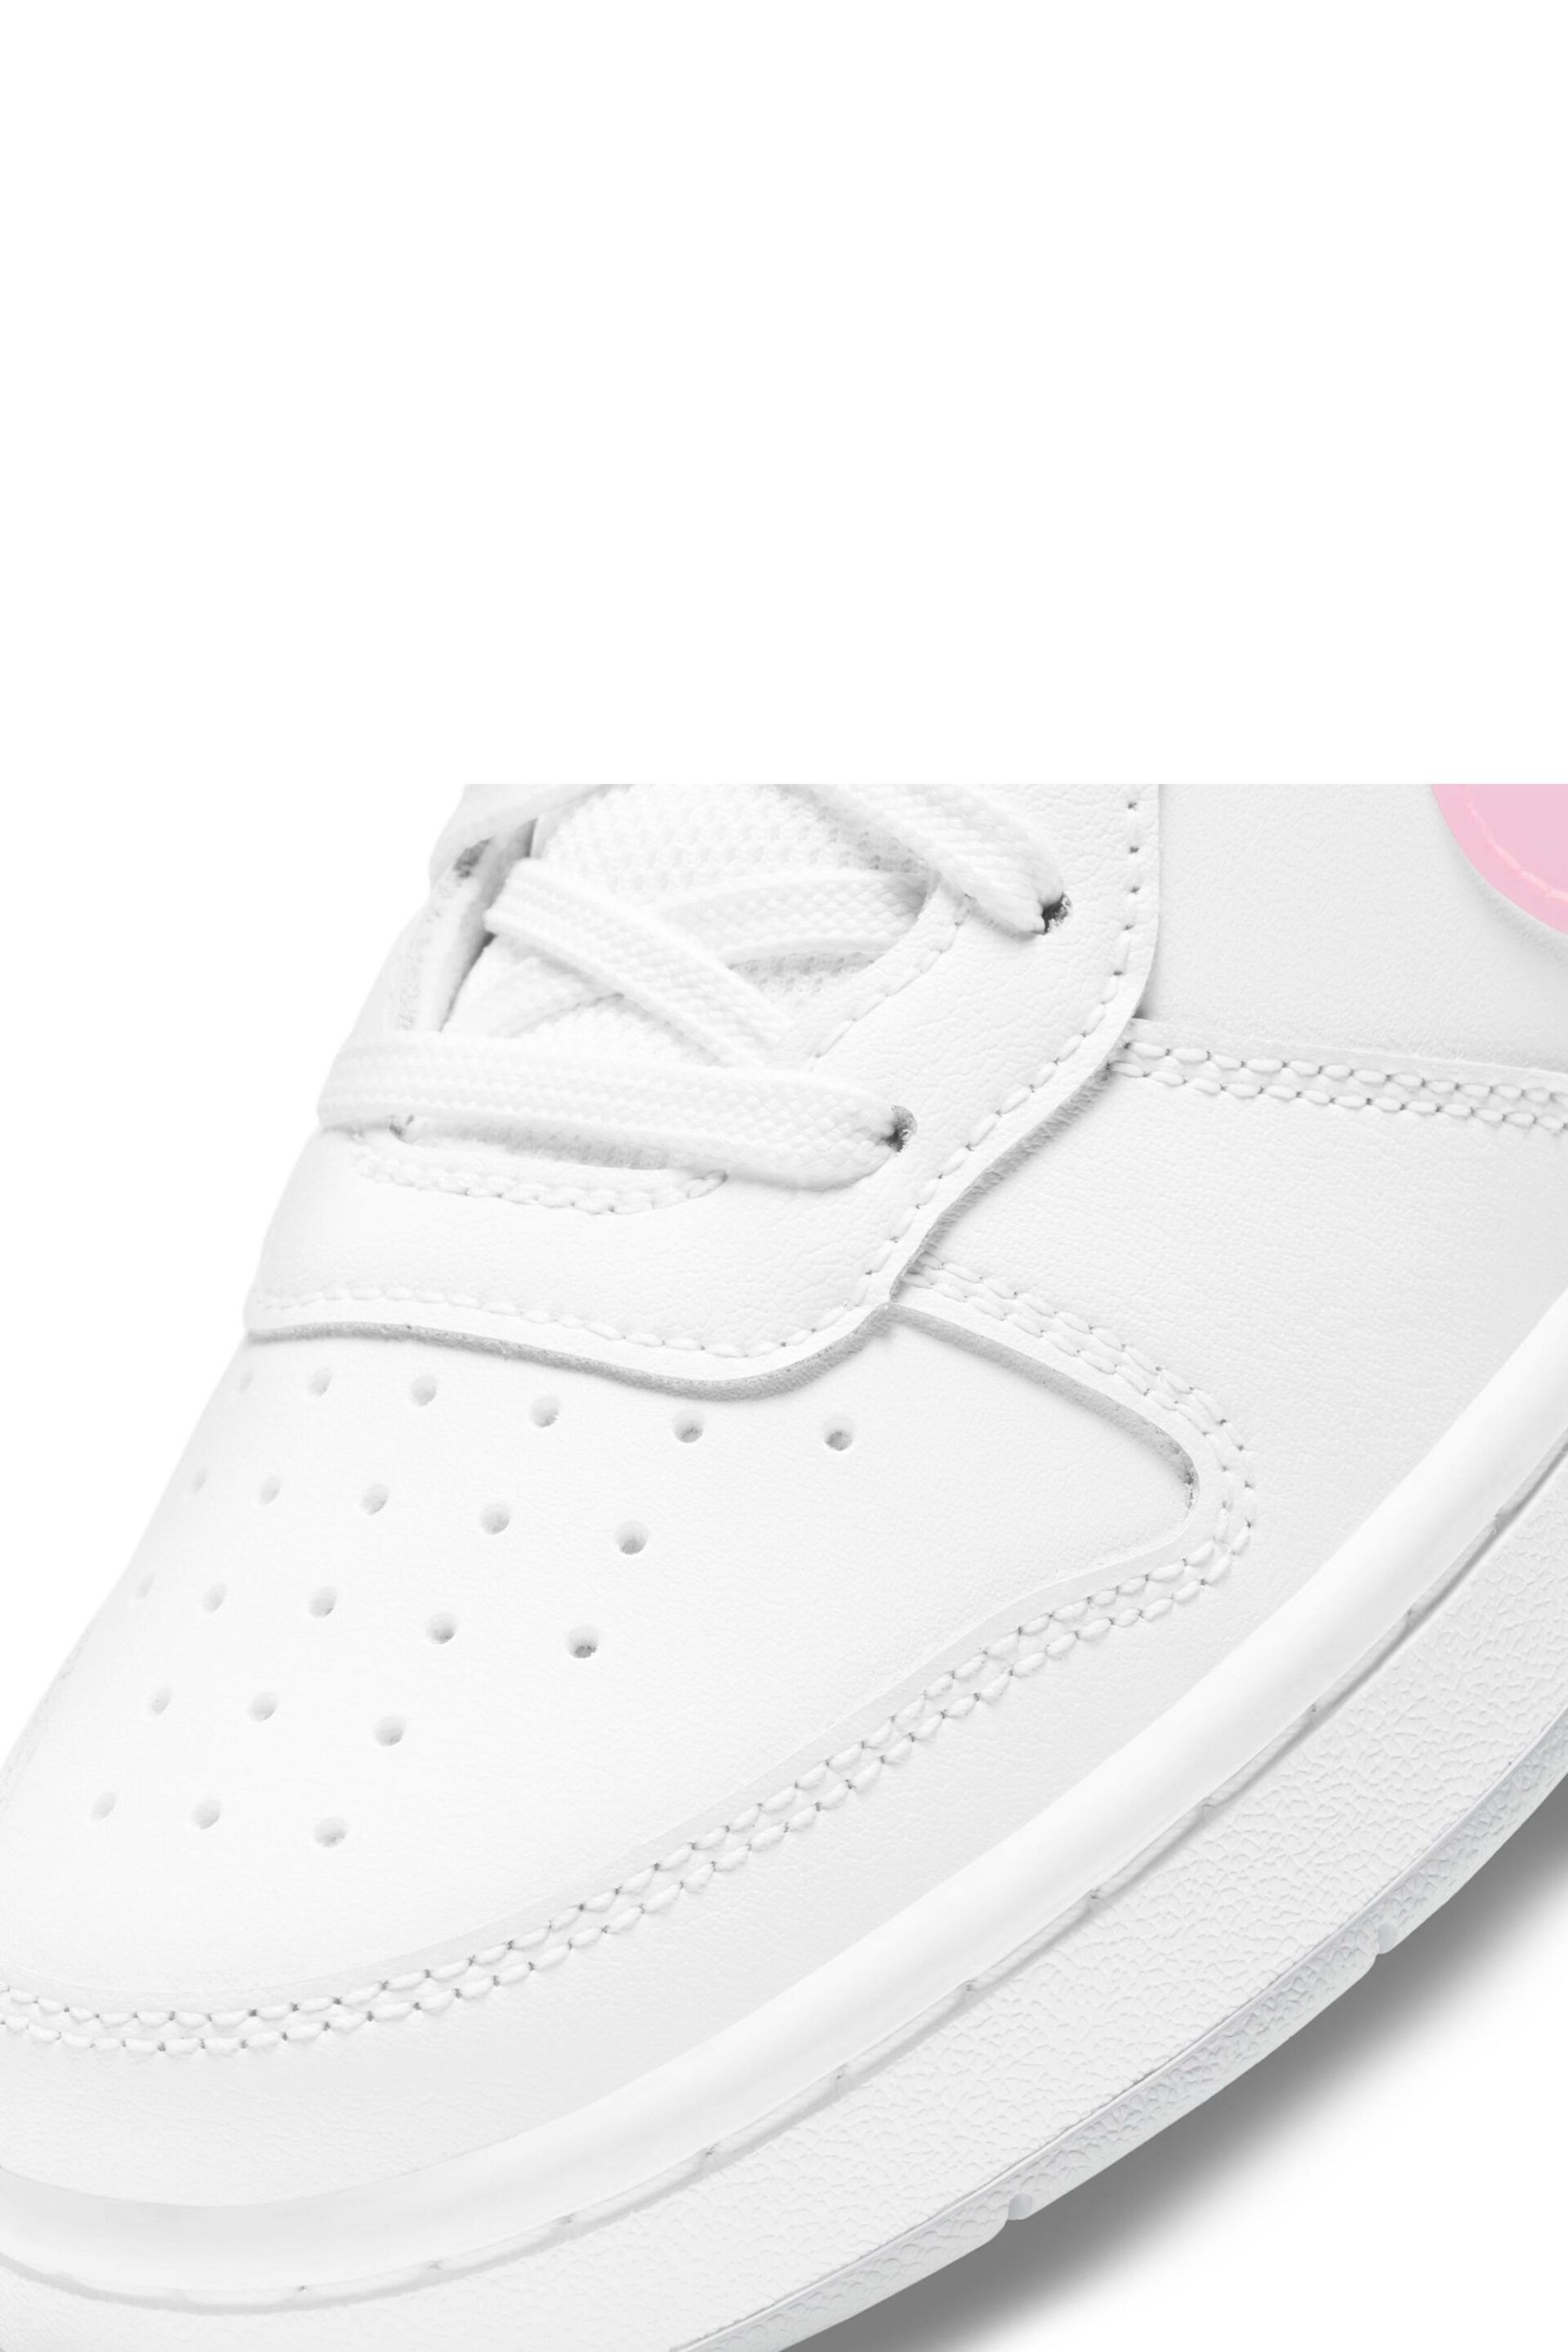 Nike White/Pink Court Borough Low Youth Trainers - Image 7 of 8